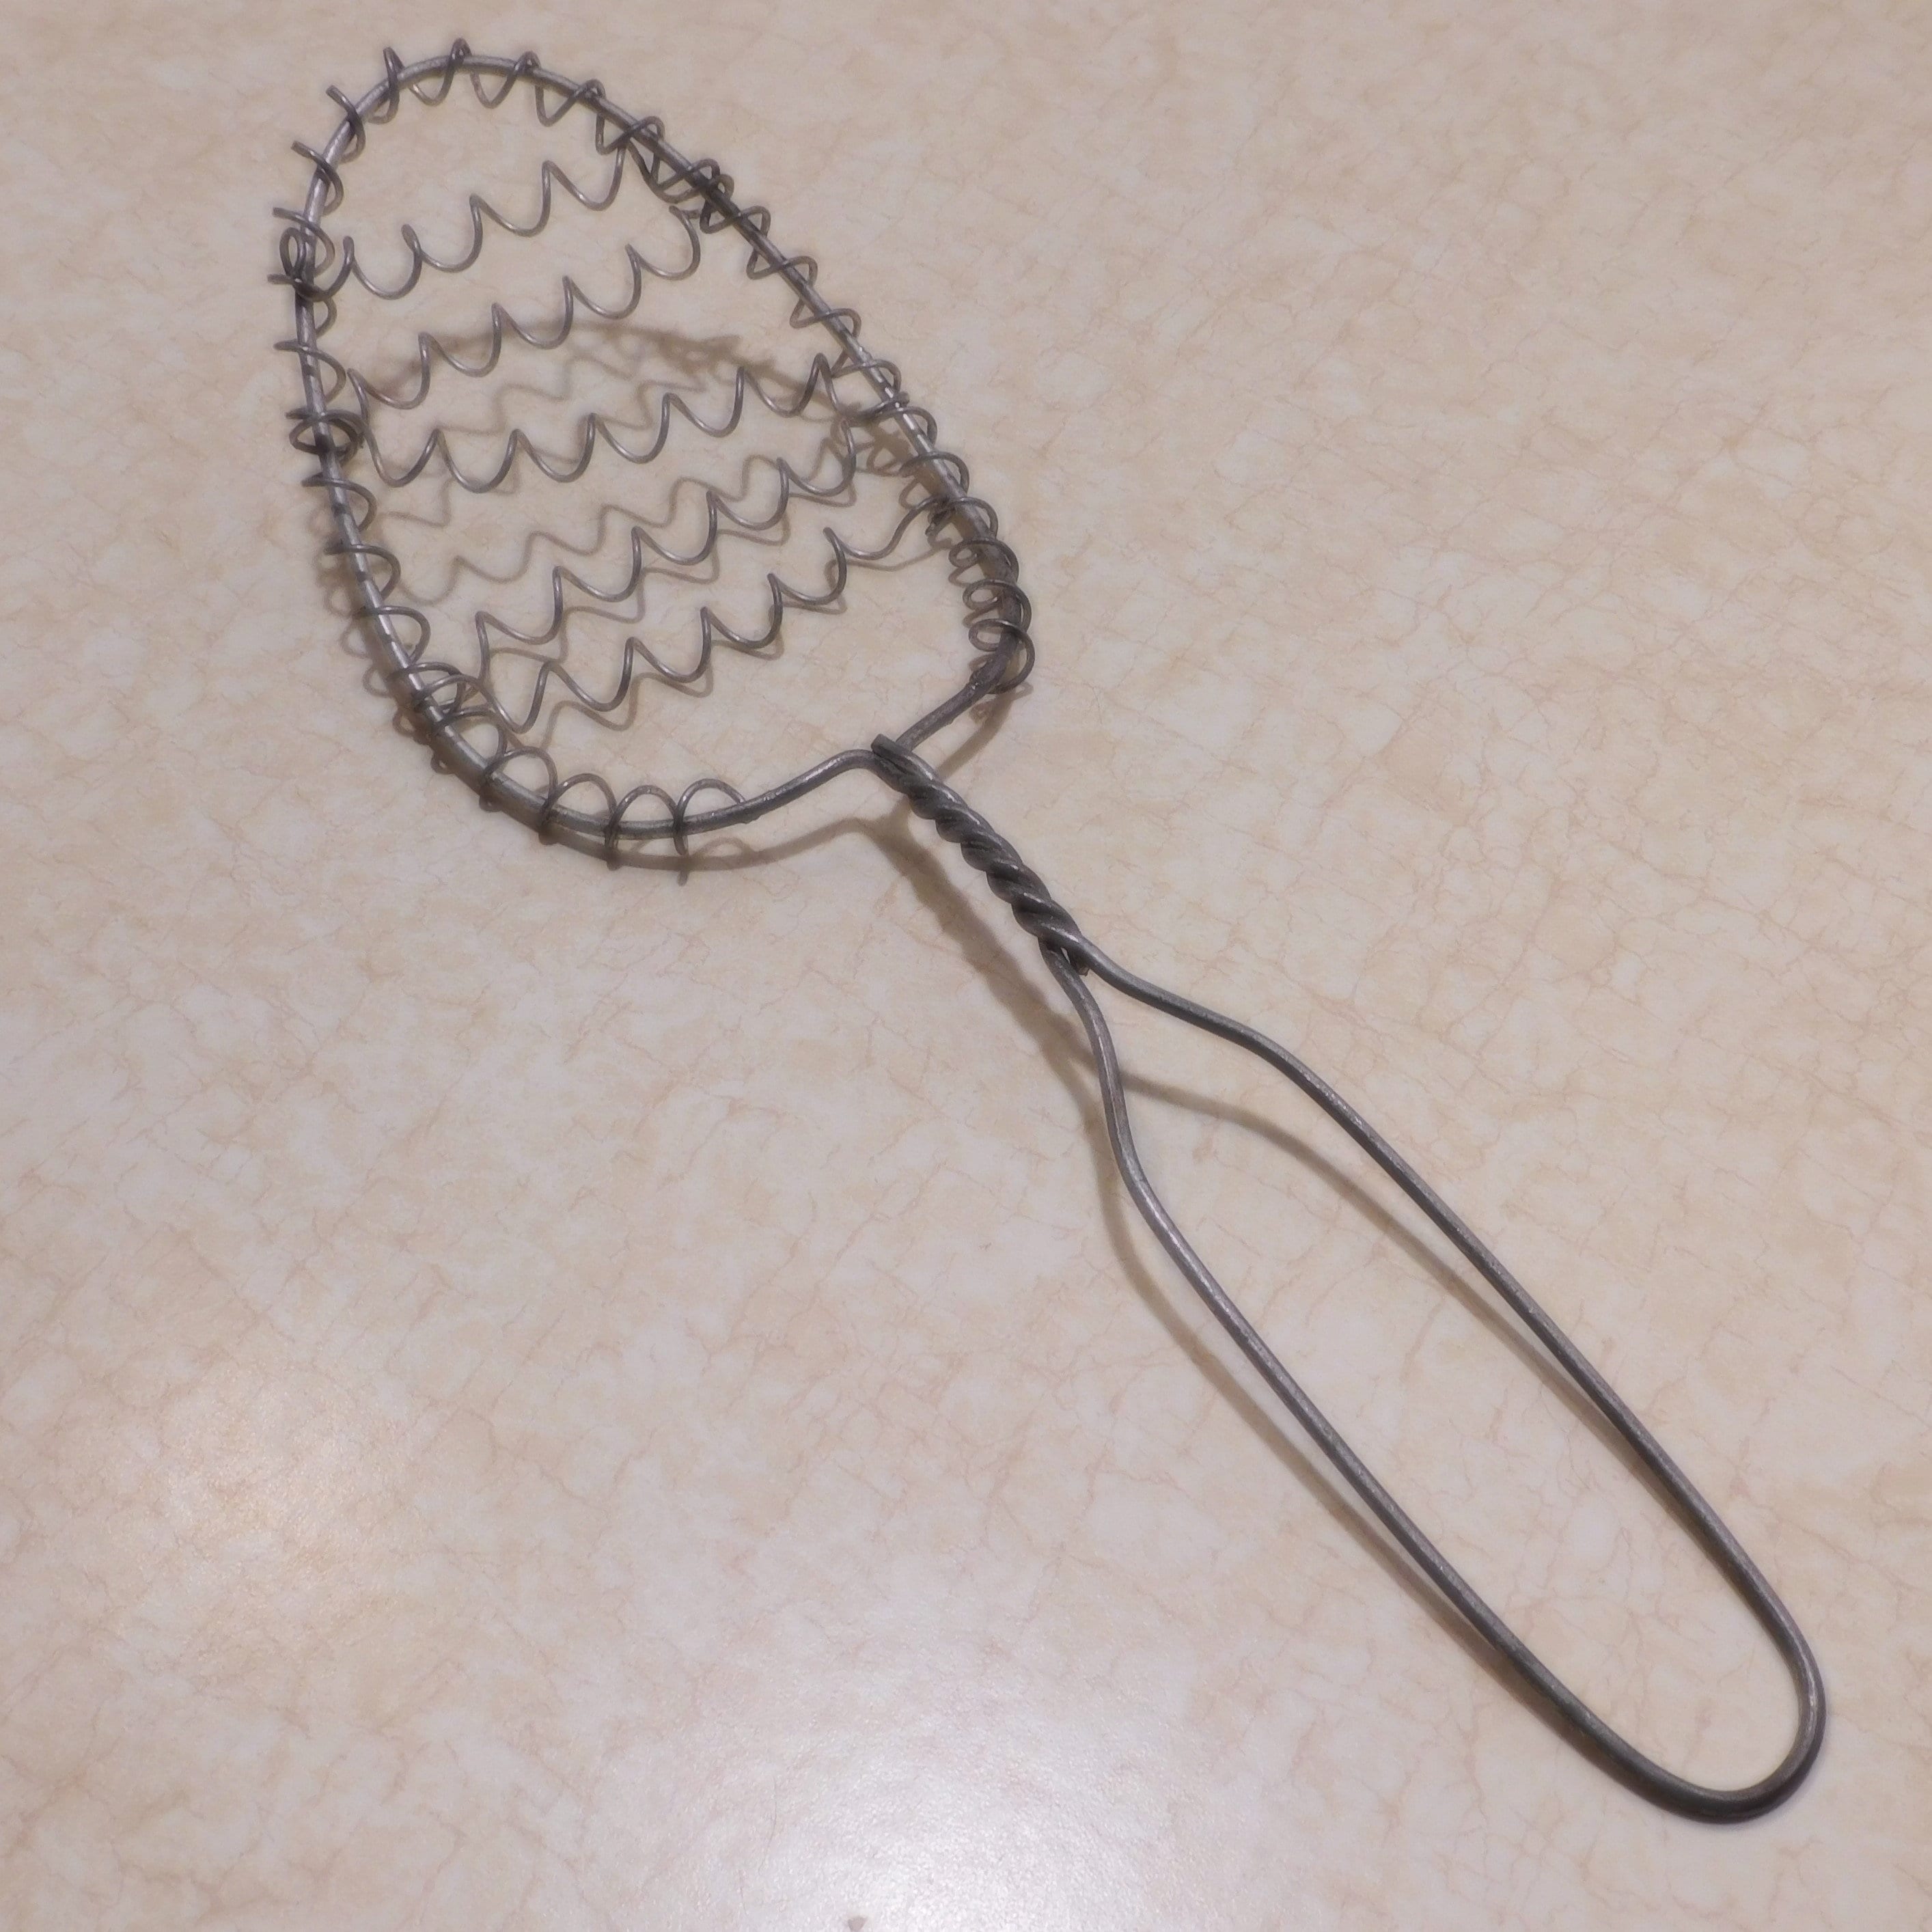 Vintage Twisted Wire Whisk Slotted Spoon Masher Beater Strainer